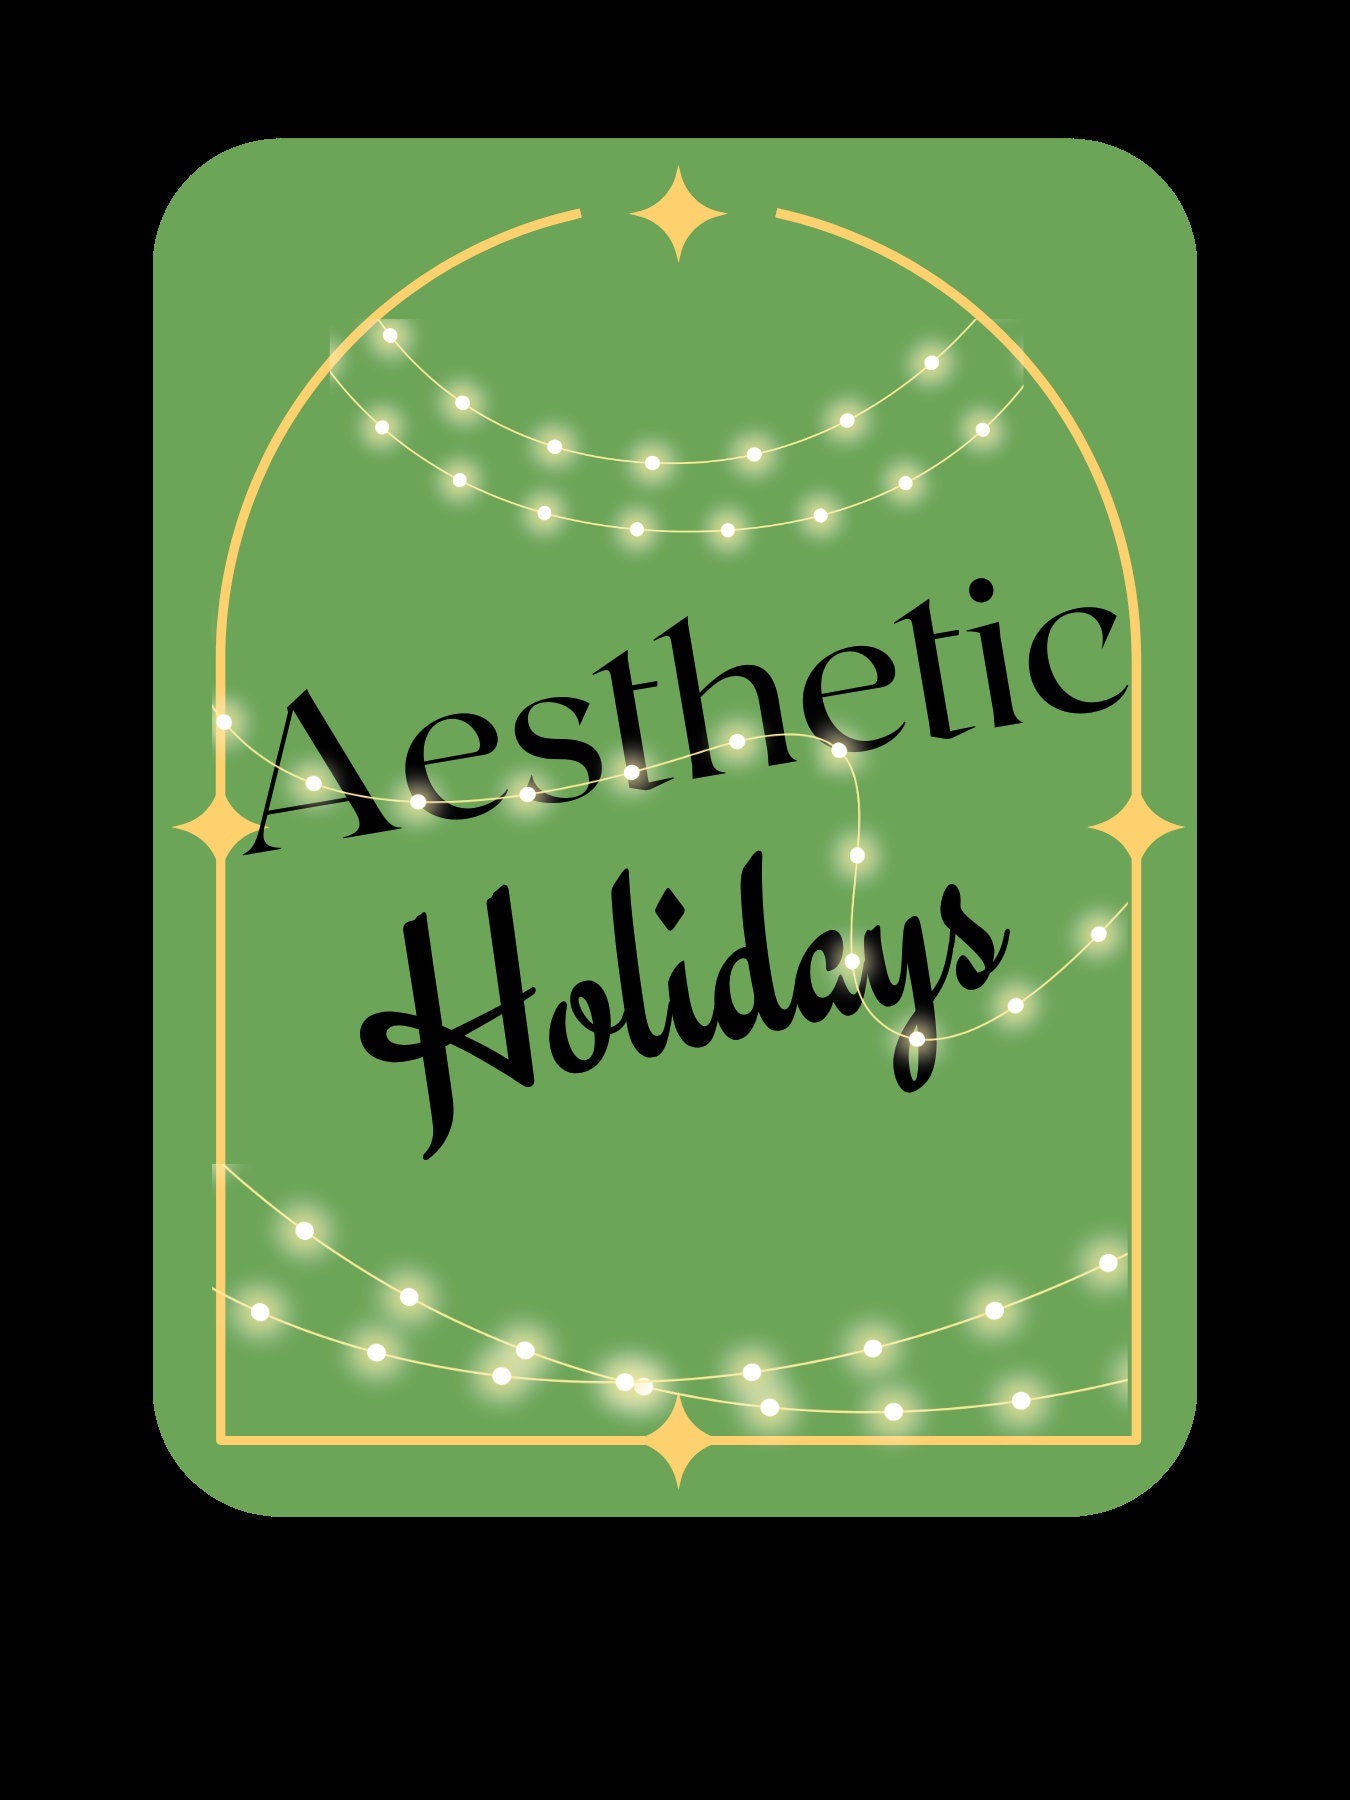 Aesthetic Holiday Sticker, Gift Wrap Label, Best Friend Stickers, Winter Vibes, Cute Holiday Sticker, Stickers For Her Gift, Girly Stickers